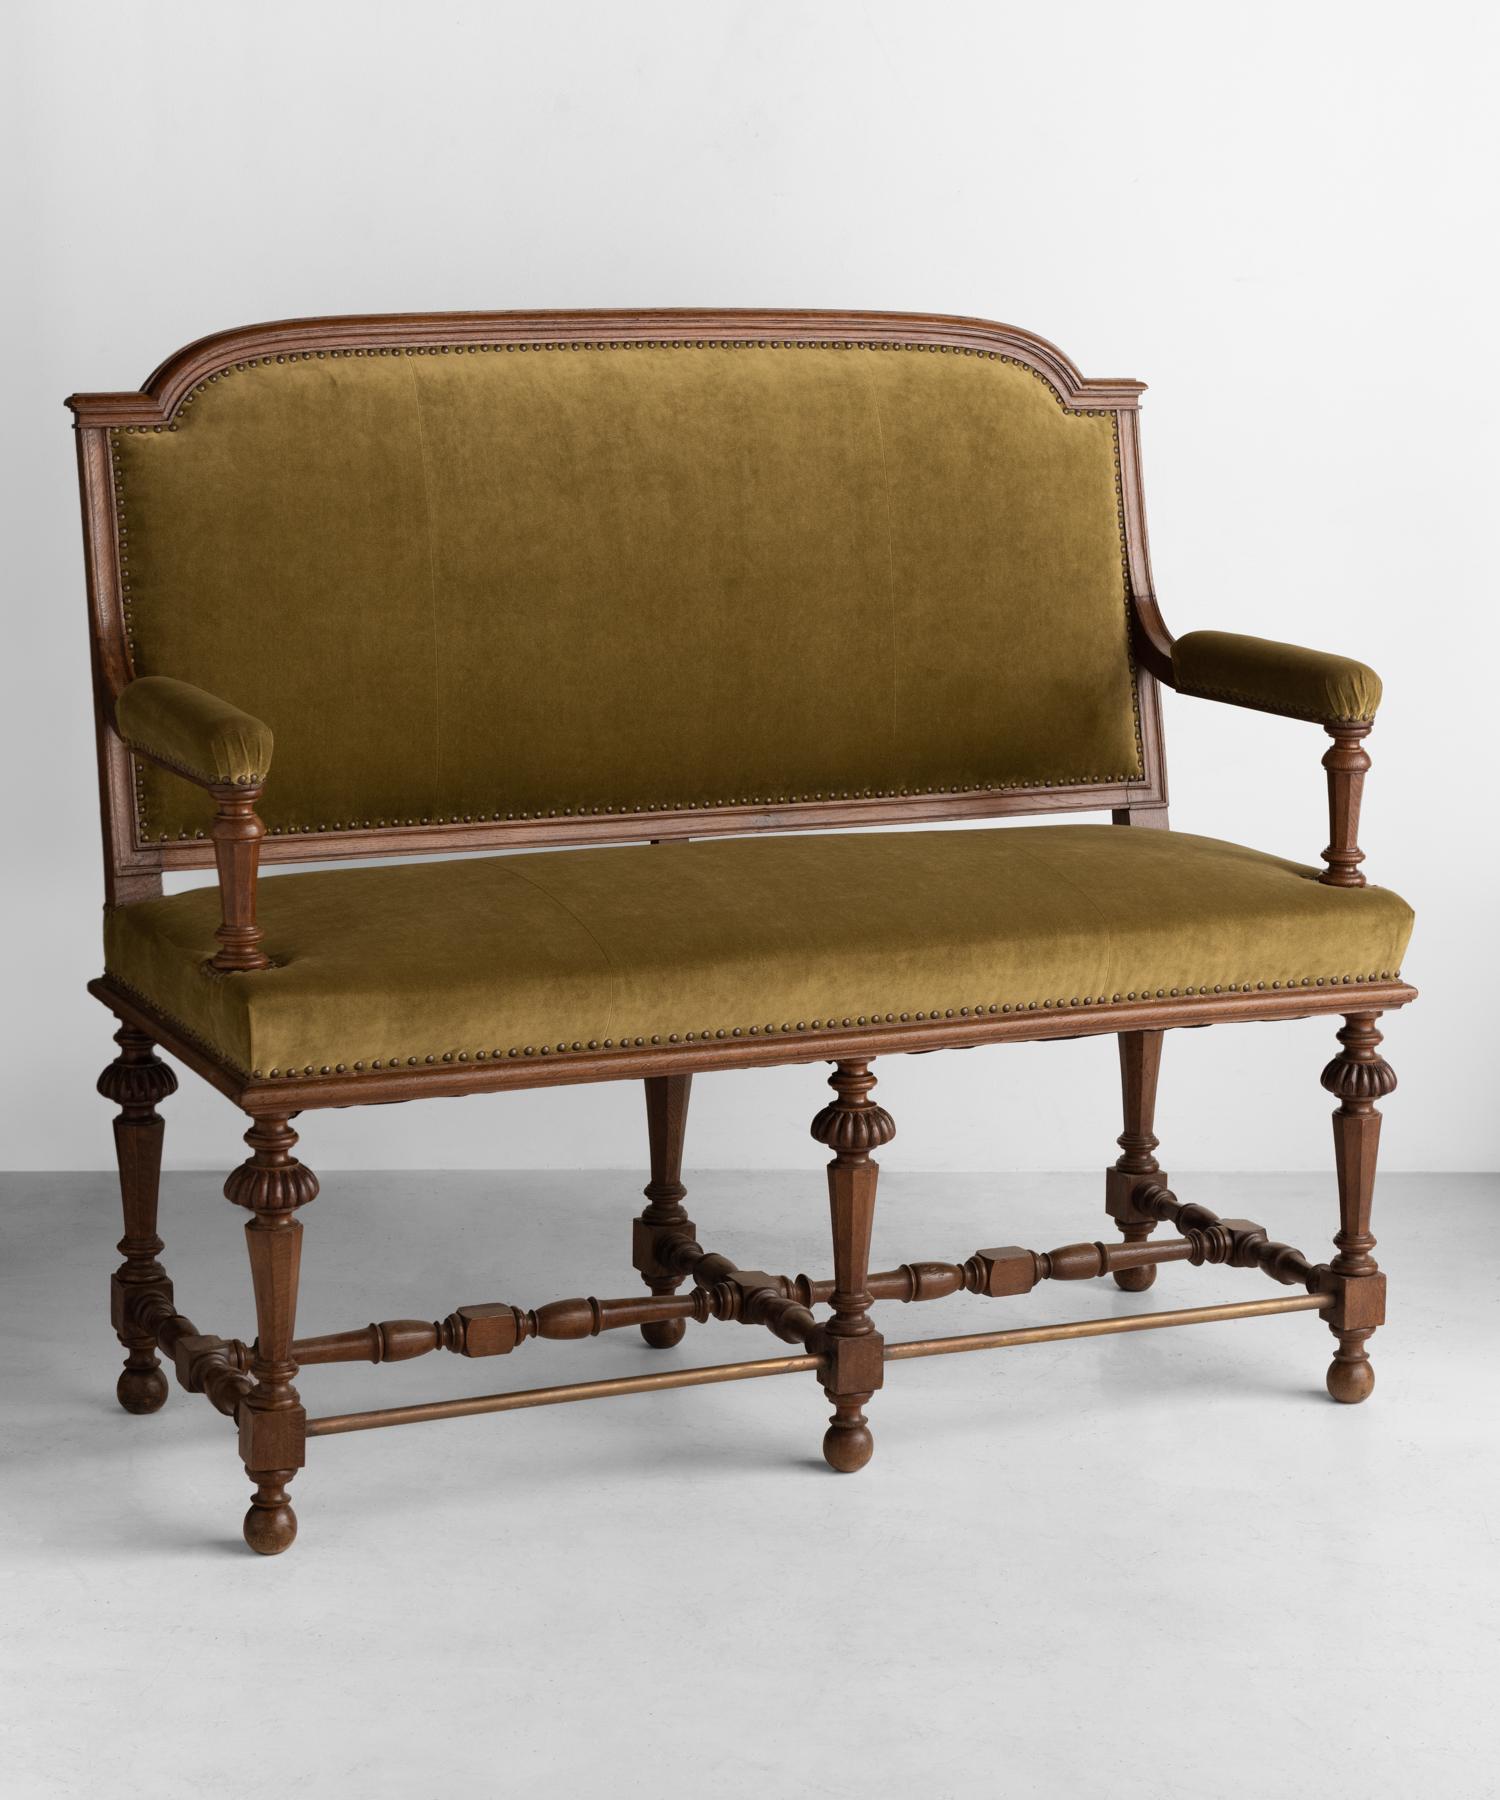 Victorian high bench, circa 1900.

Handsome bench with carved wooden frame, newly upholstered in Linwood velvet.